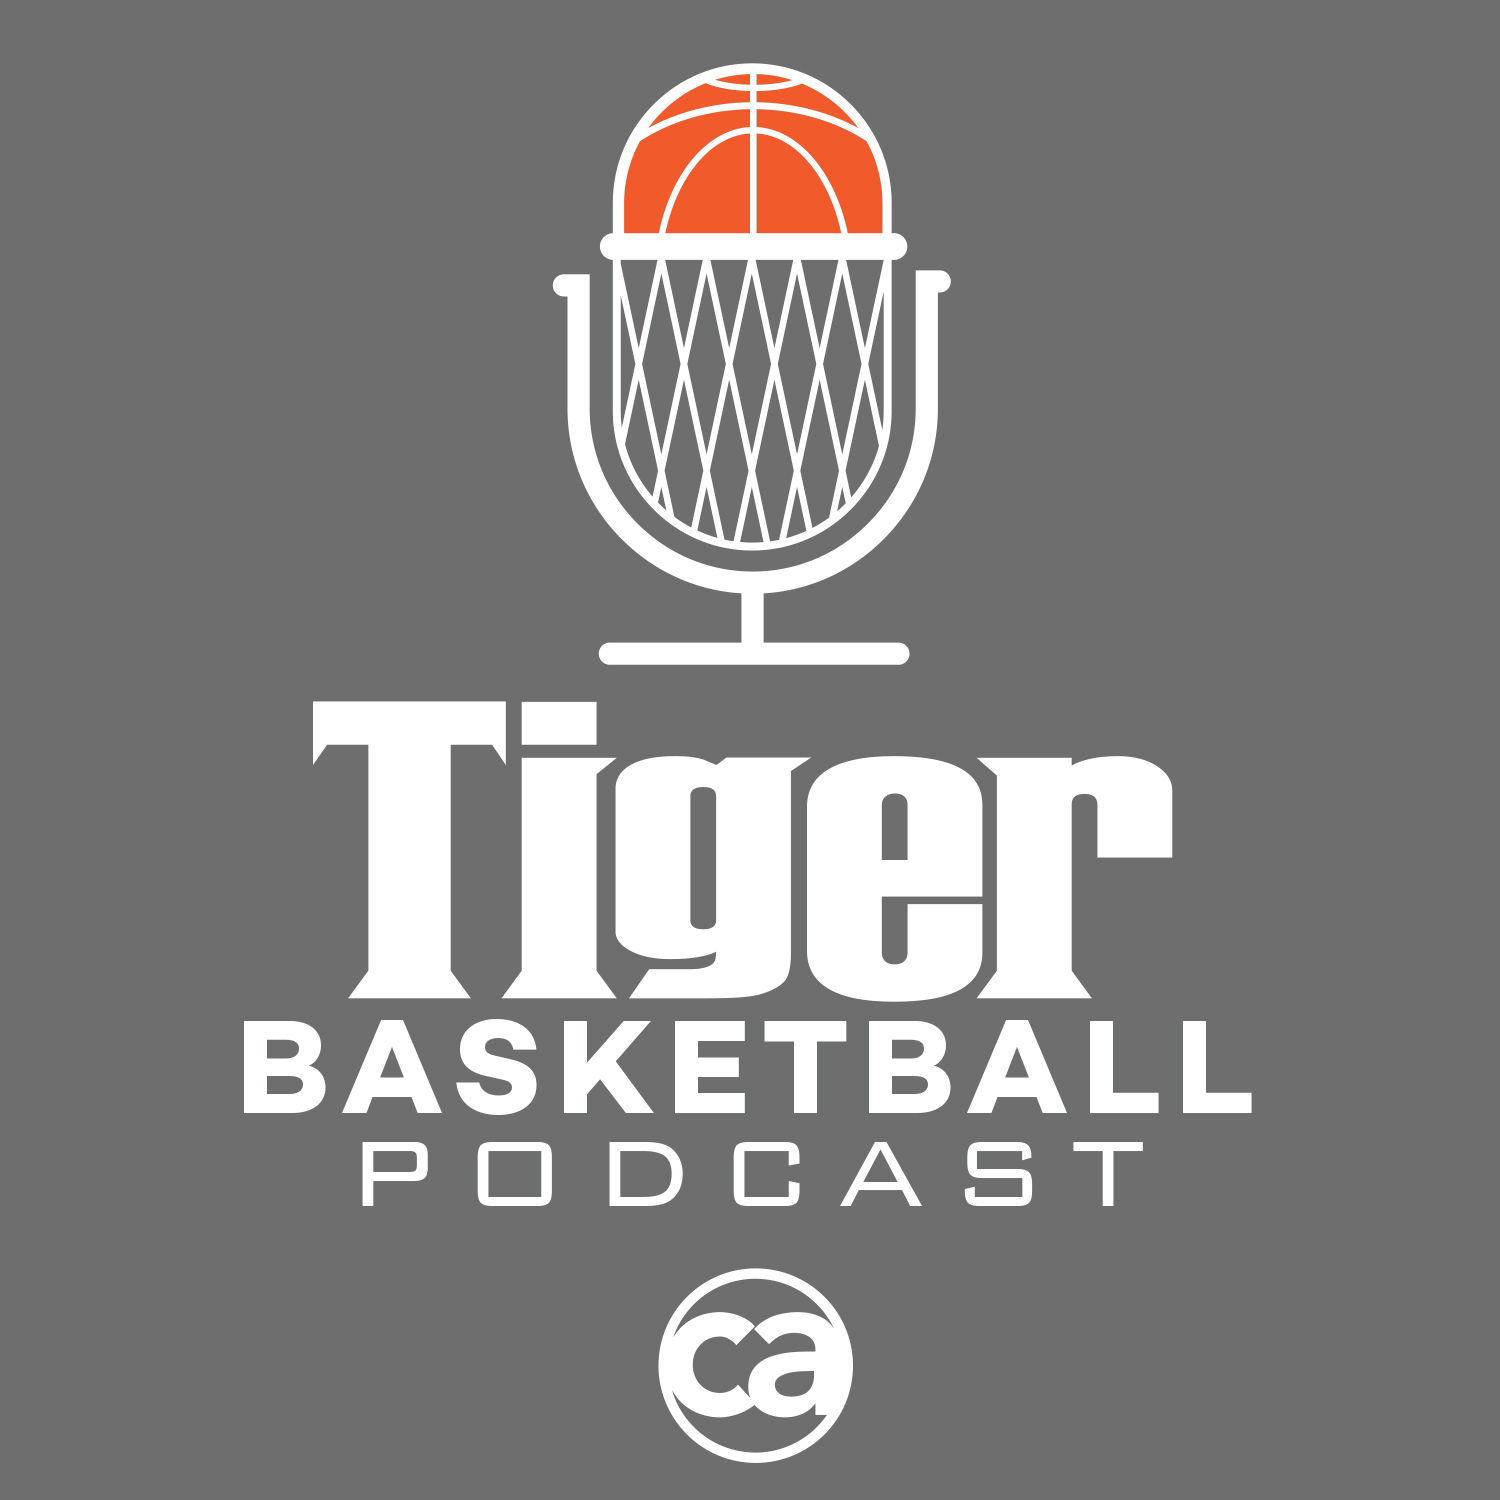 Podcast: Can Memphis stay afloat without James Wiseman, Lester Quinones?